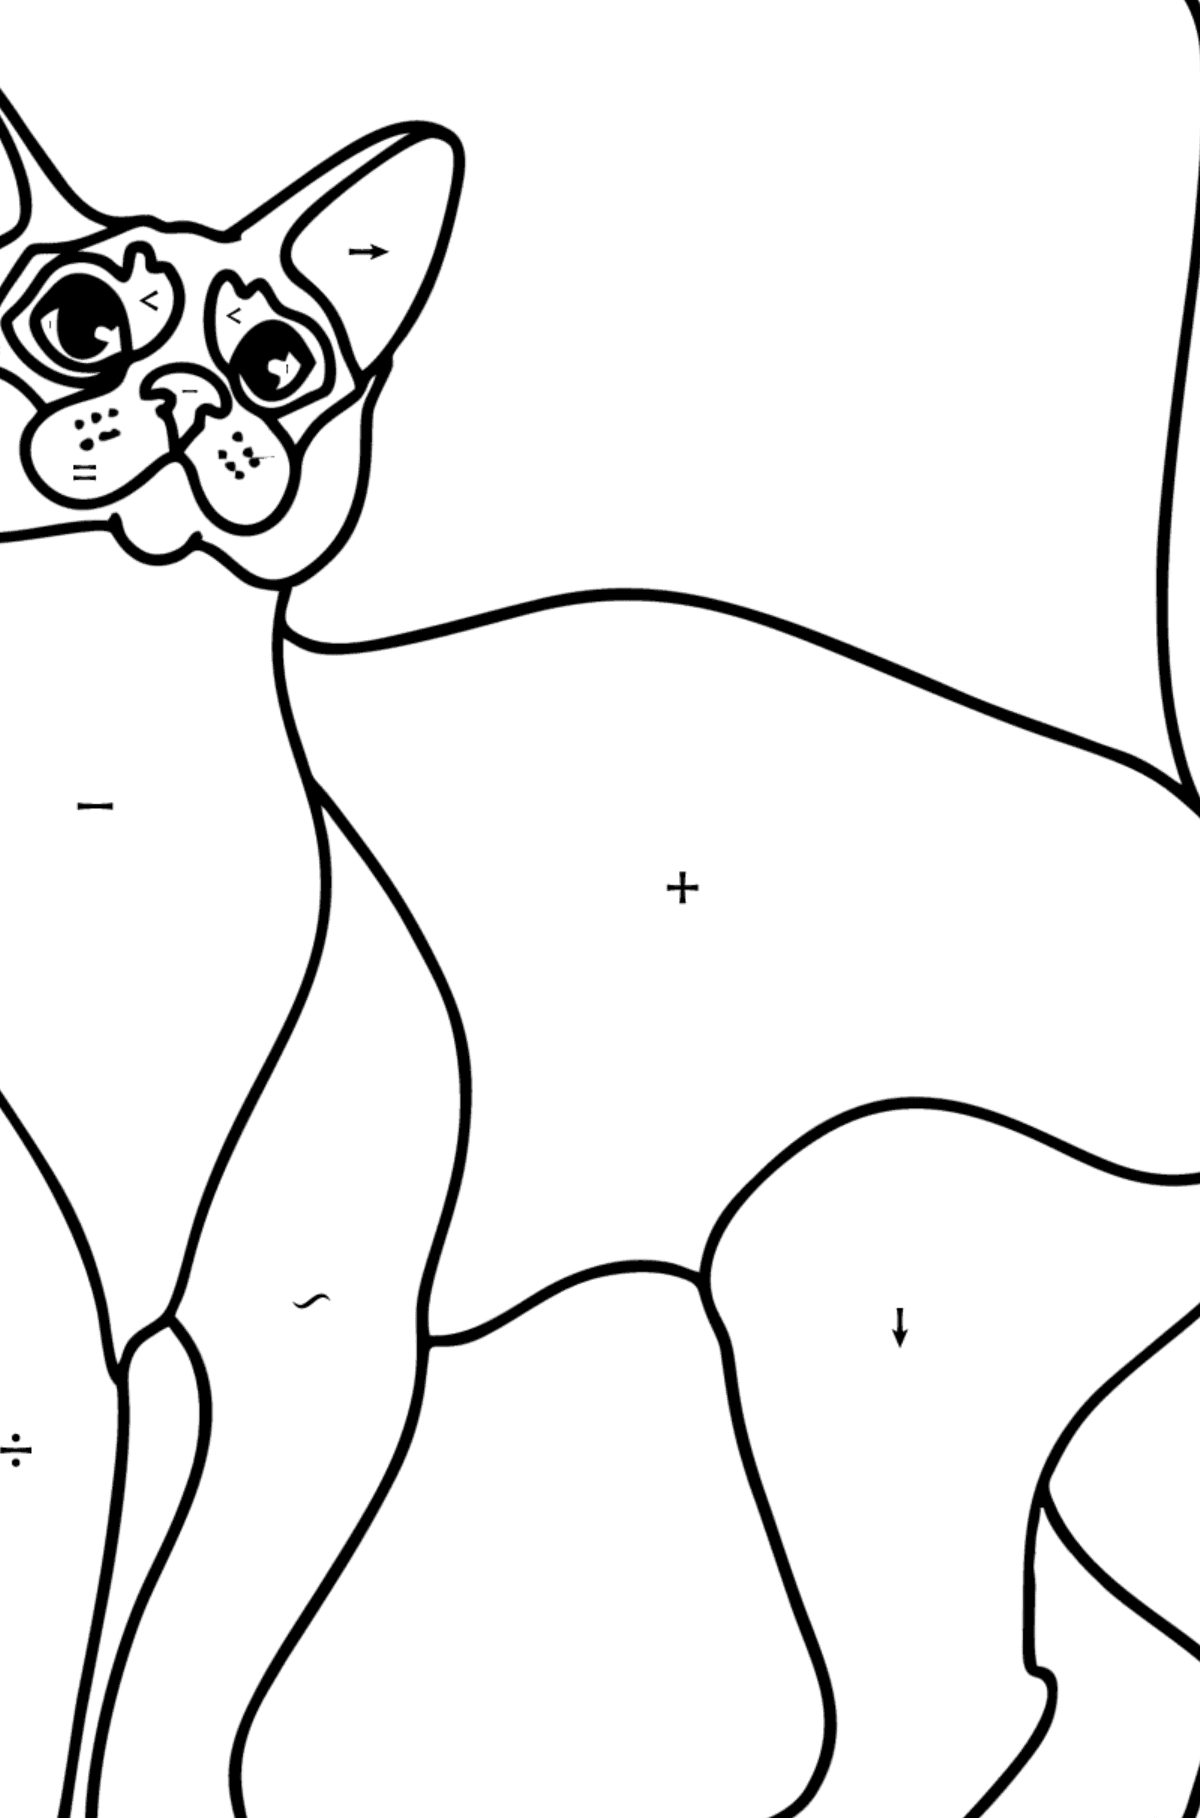 Abyssinian Cat coloring page - Coloring by Symbols for Kids